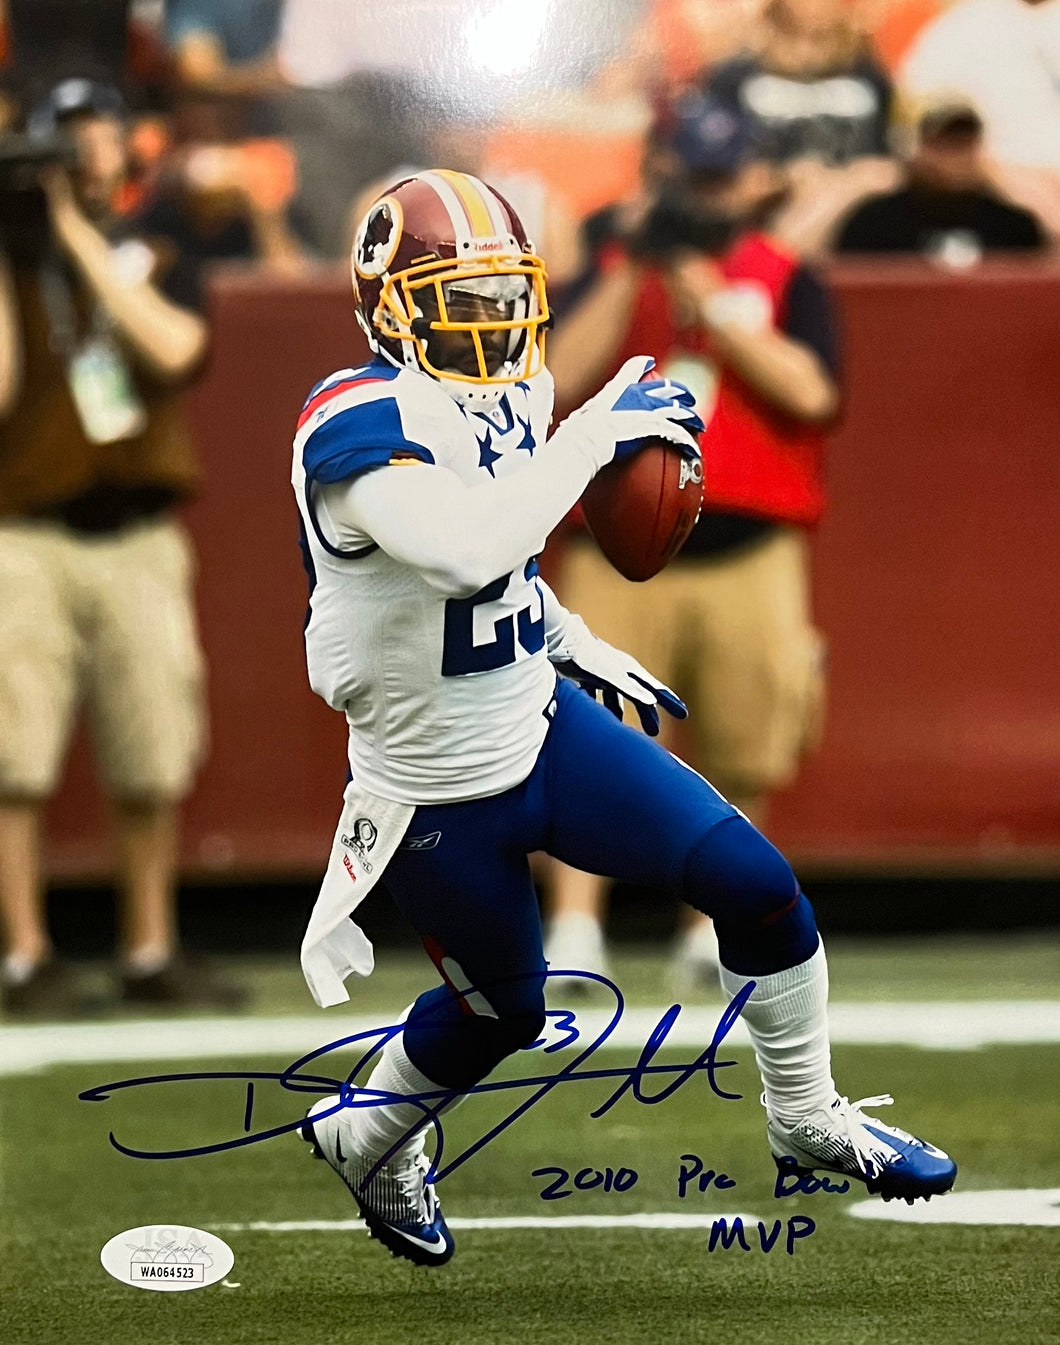 DeAngelo Hall Signed Pro Bowl 8x10 photo